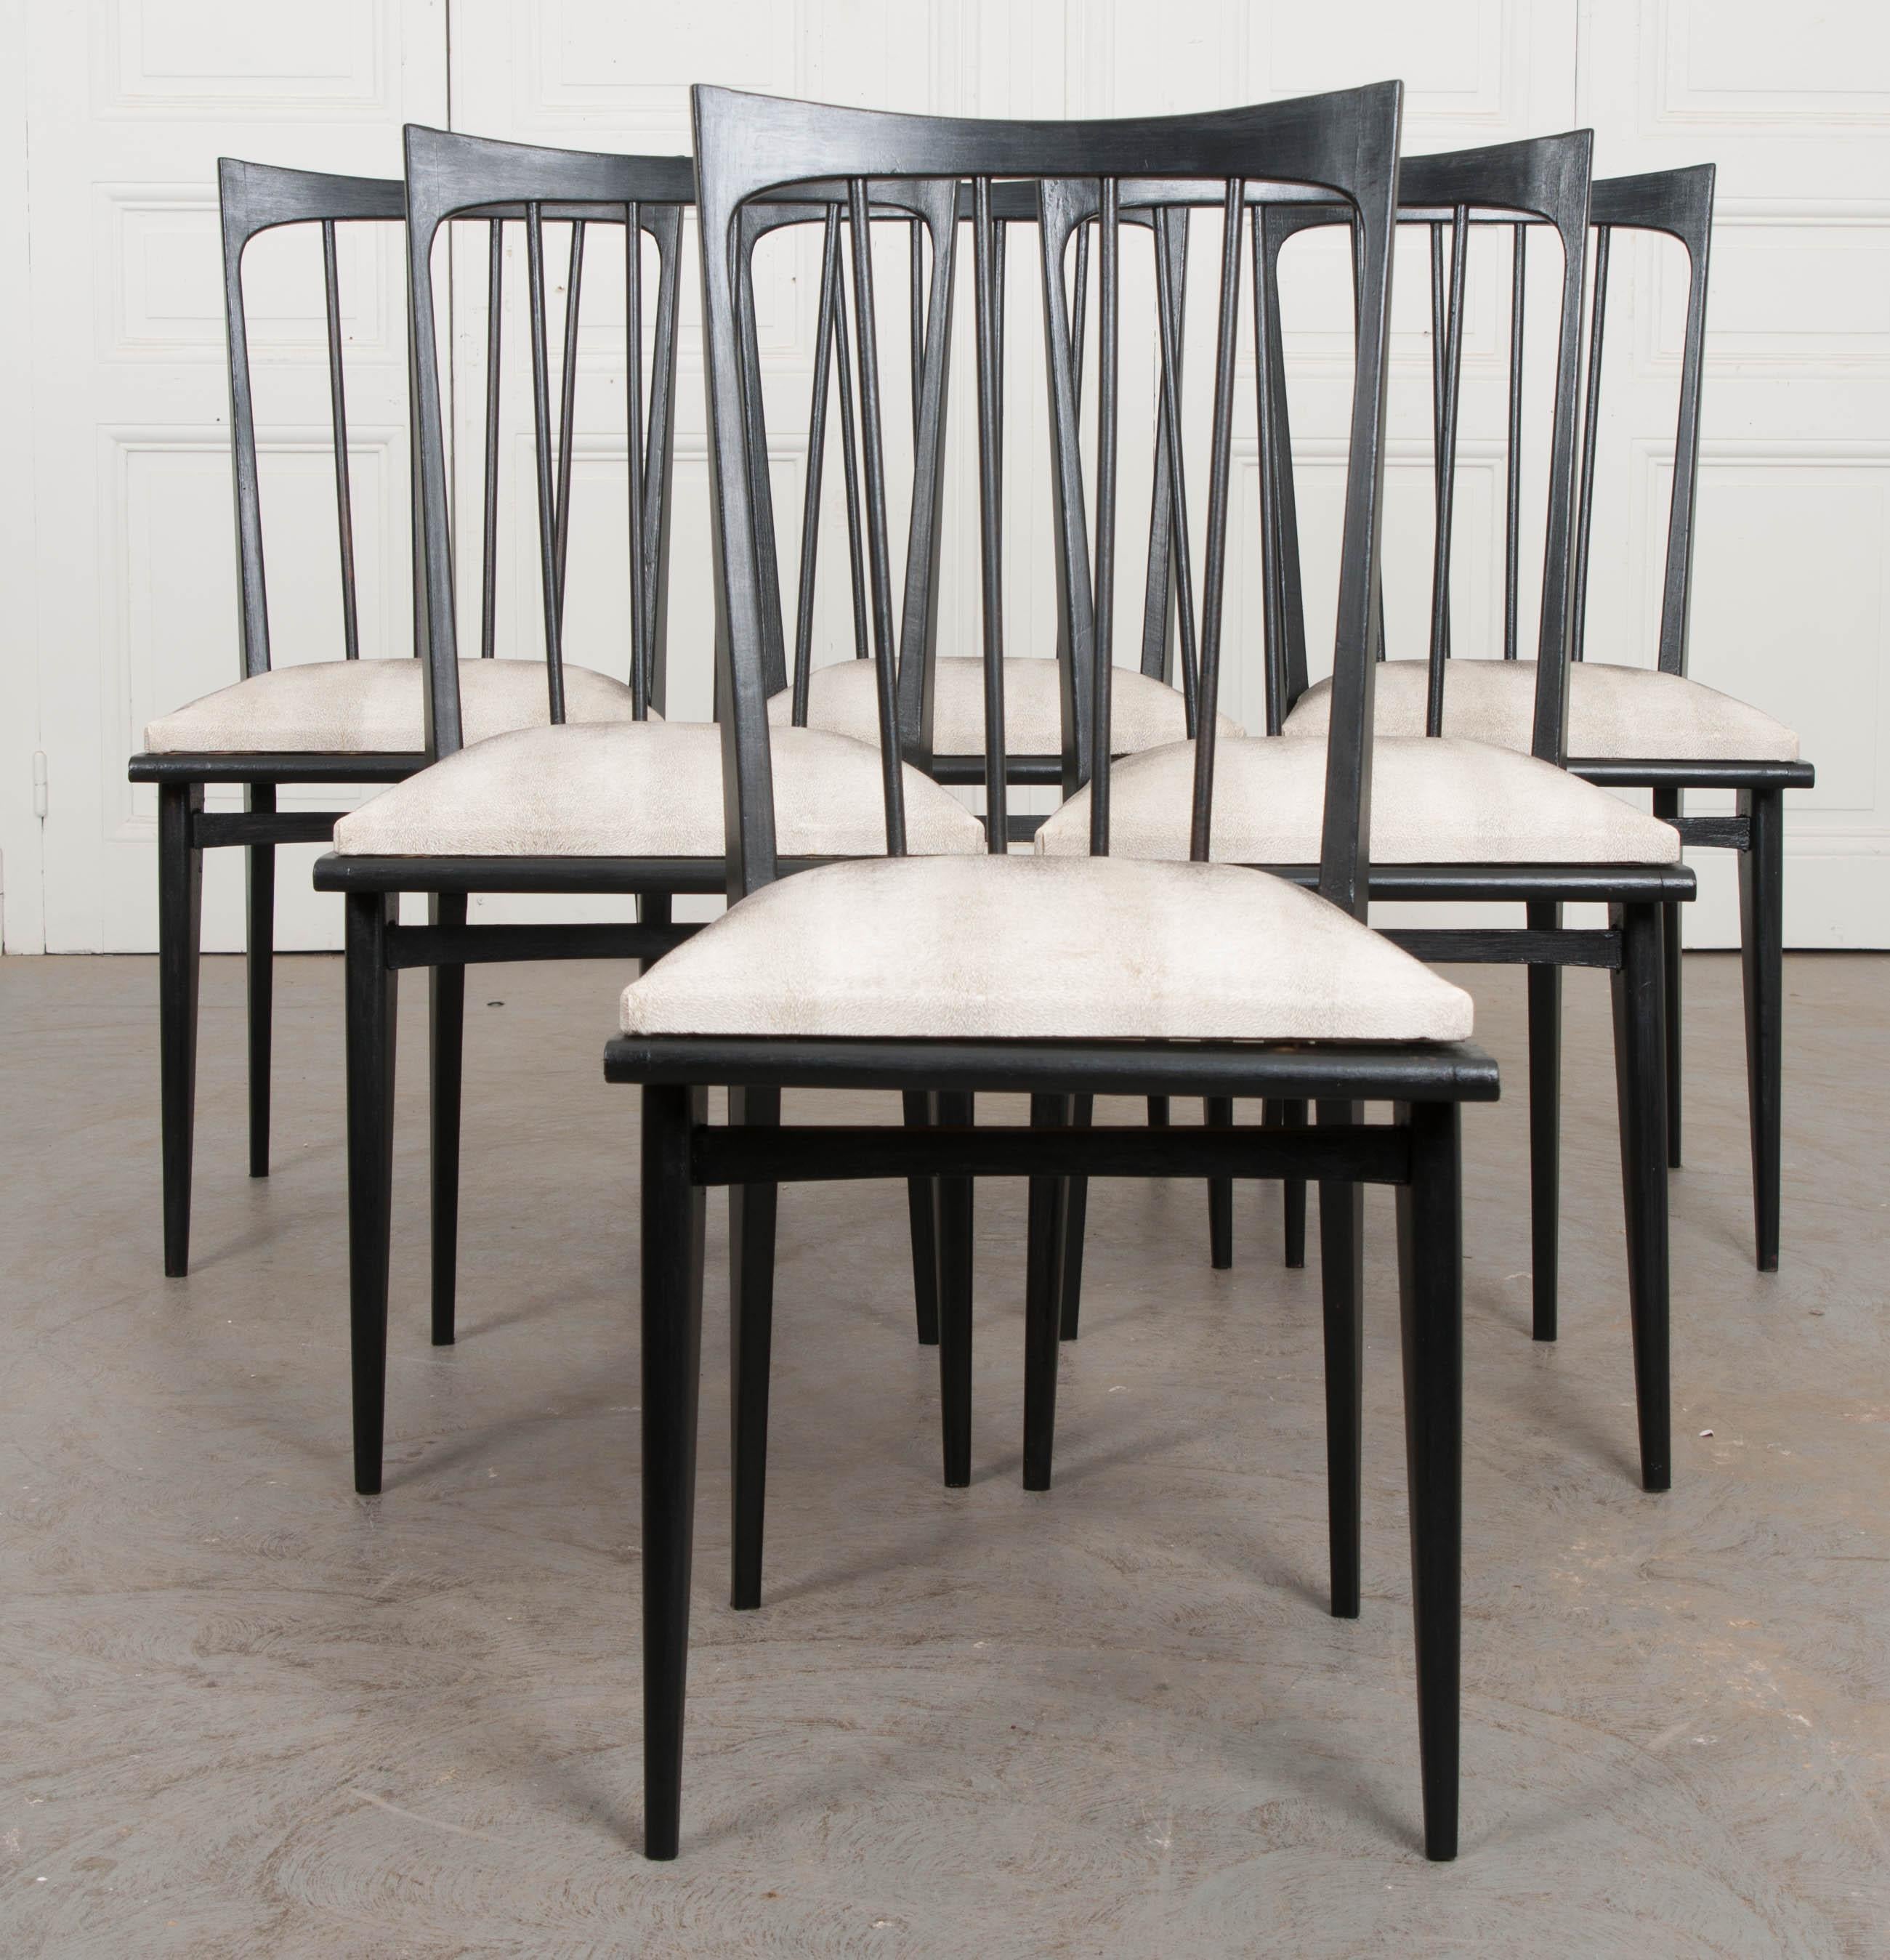 A smart set of dining chairs, recently painted black, from the earlier part of the 20th century, France. The chairs have a funky style, with their backs done in a shaped comb-form and angular seats. The seats are upholstered in an ivory textured